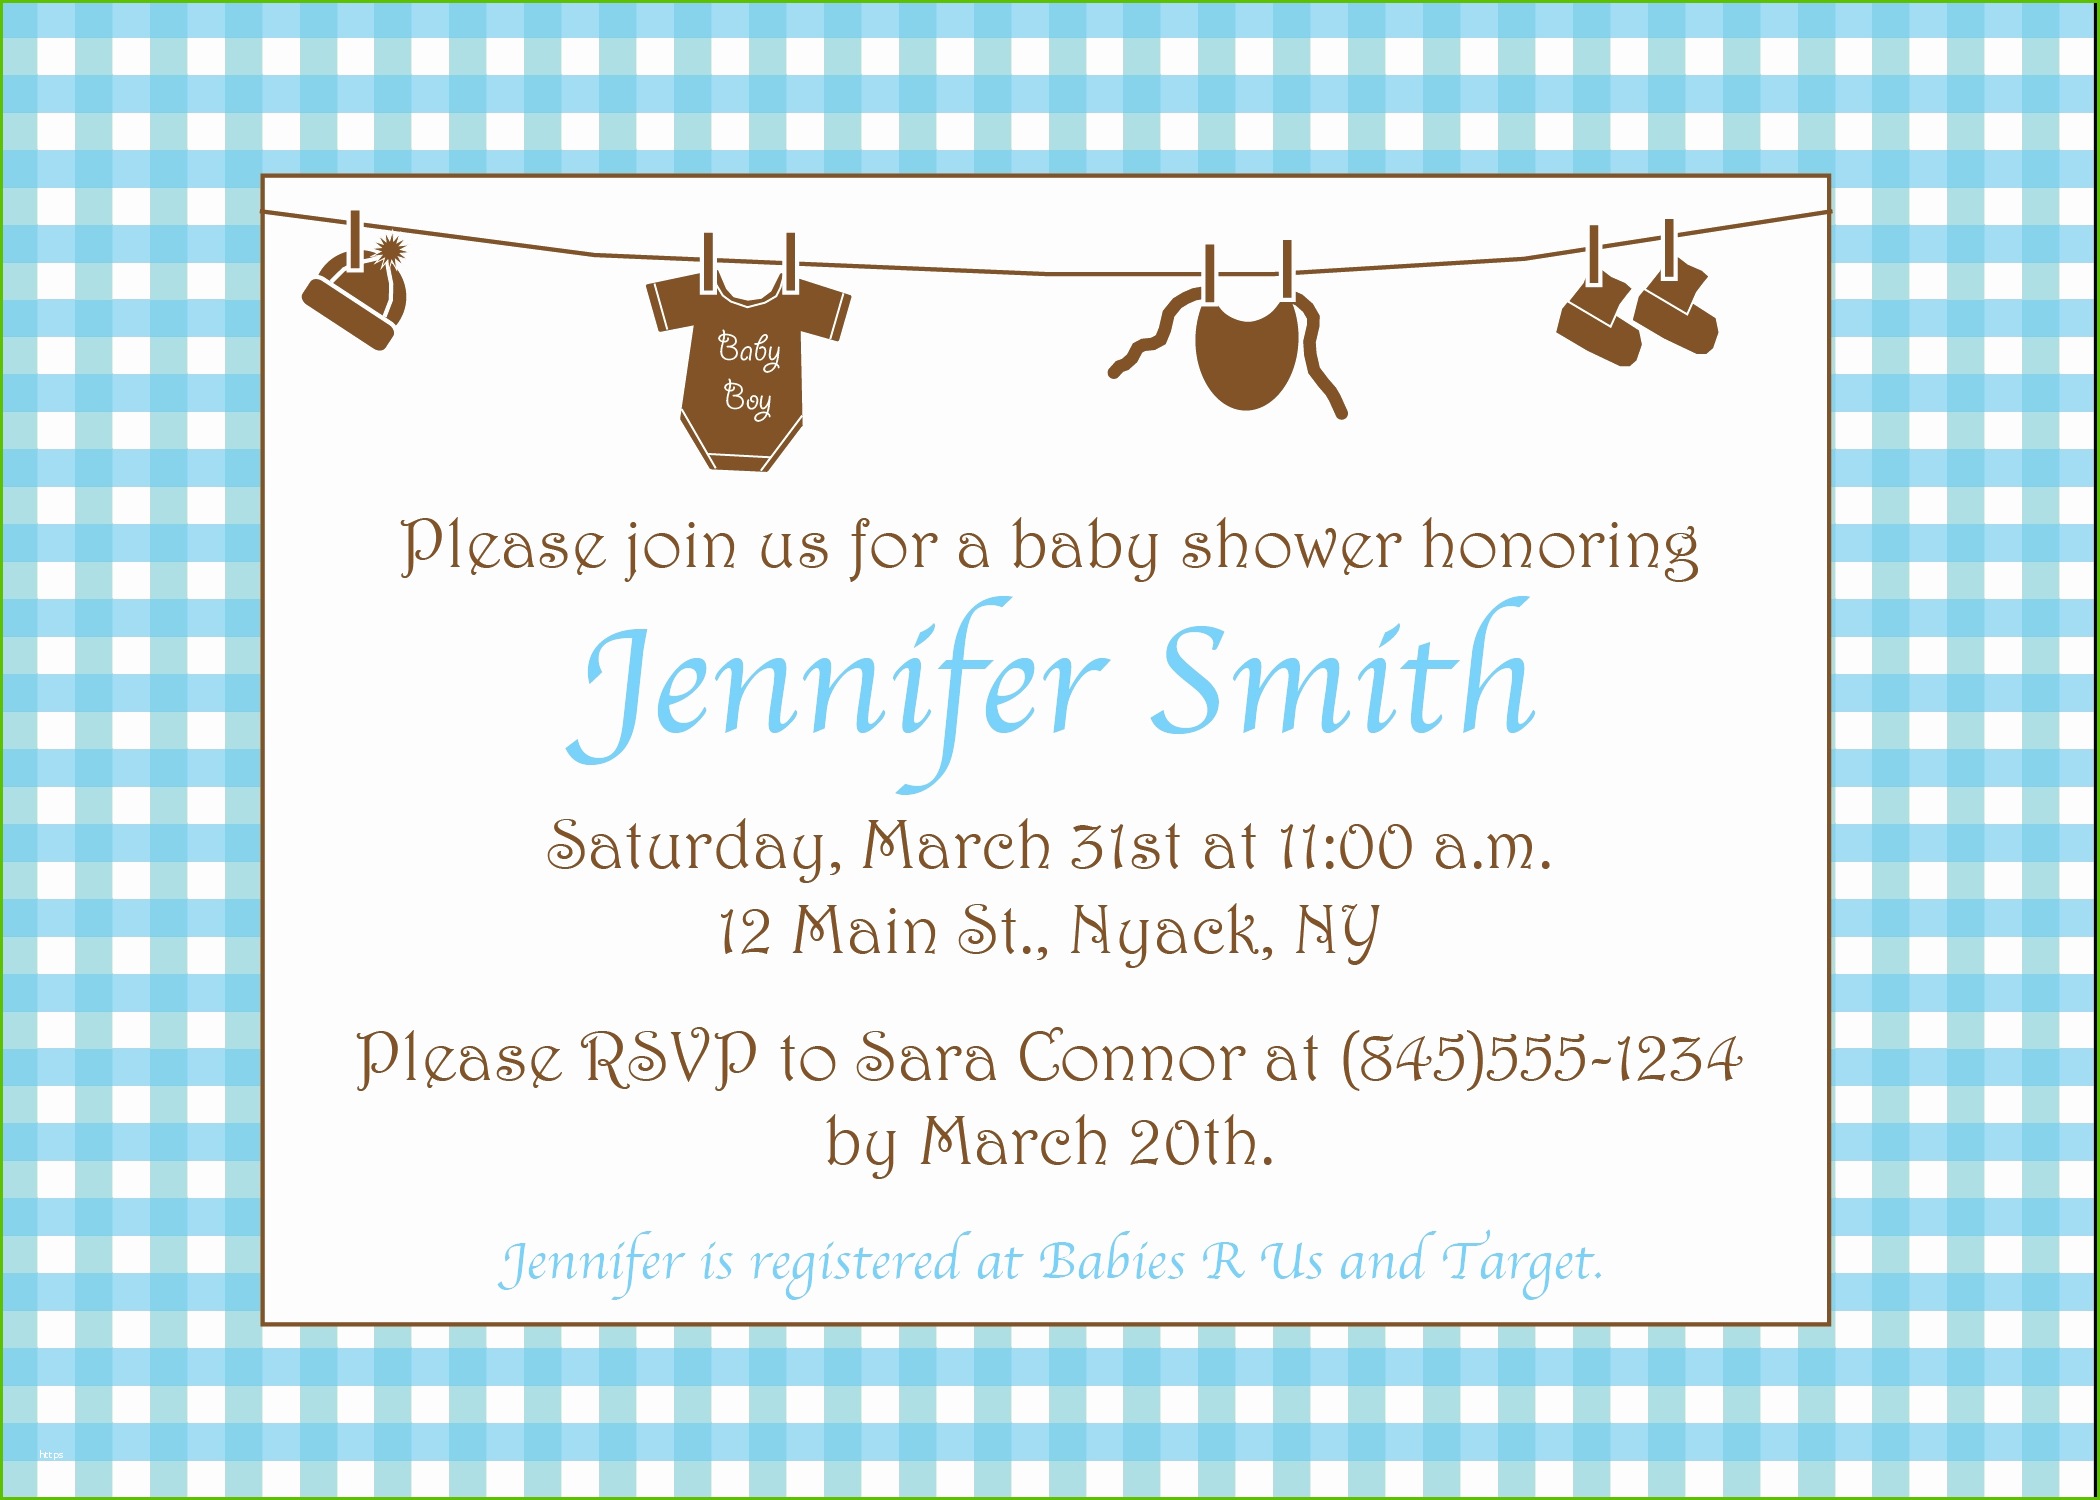 Full Size of Baby Shower:delightful Baby Shower Invitation Wording Picture Designs Baby Shower Invitation Wording Baby Shower Invitation Wording Examples Beautiful Example Baby Shower Invitation